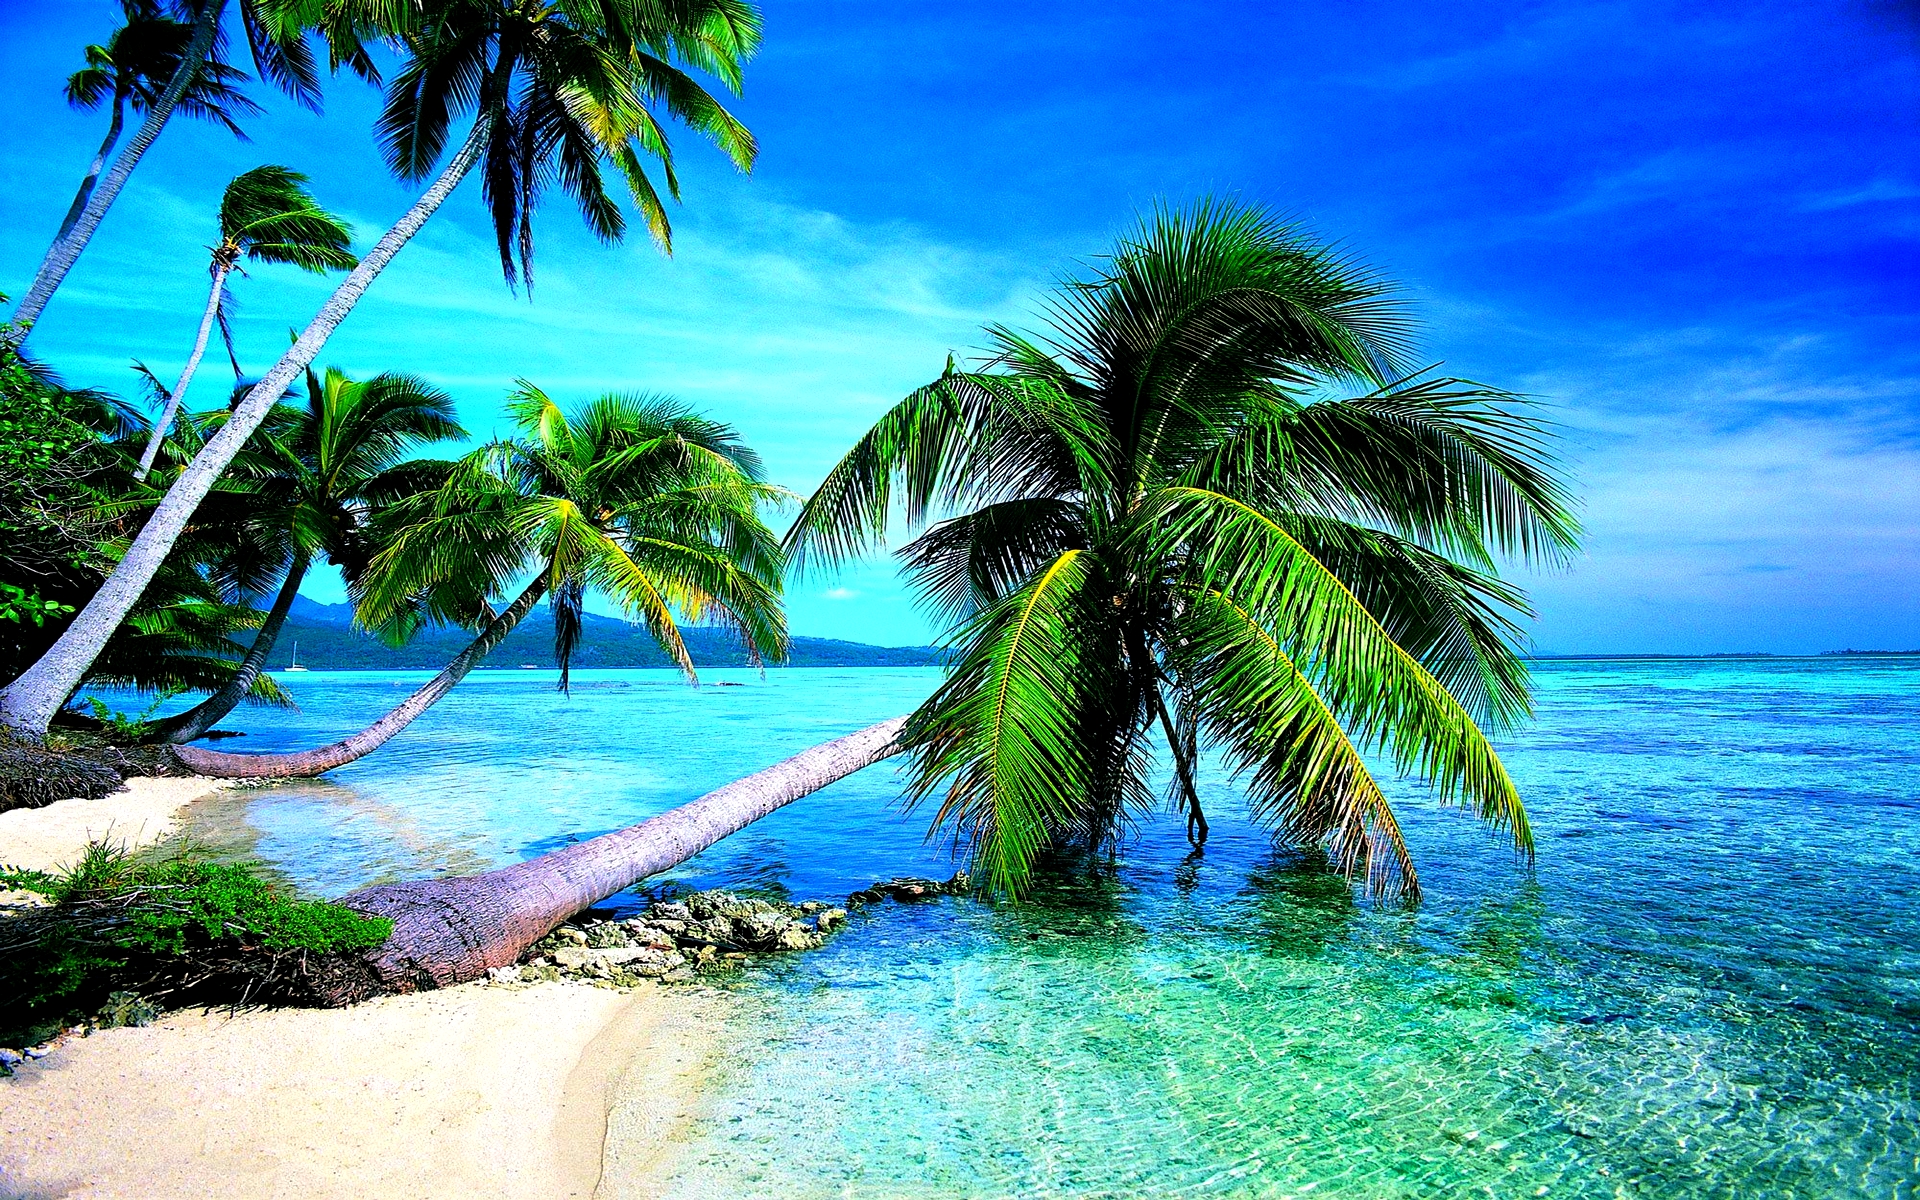 ... Free Beach Screensavers And Wallpapers – Tropical Beach With Clear Water Refresh Your PC Screen Using ...